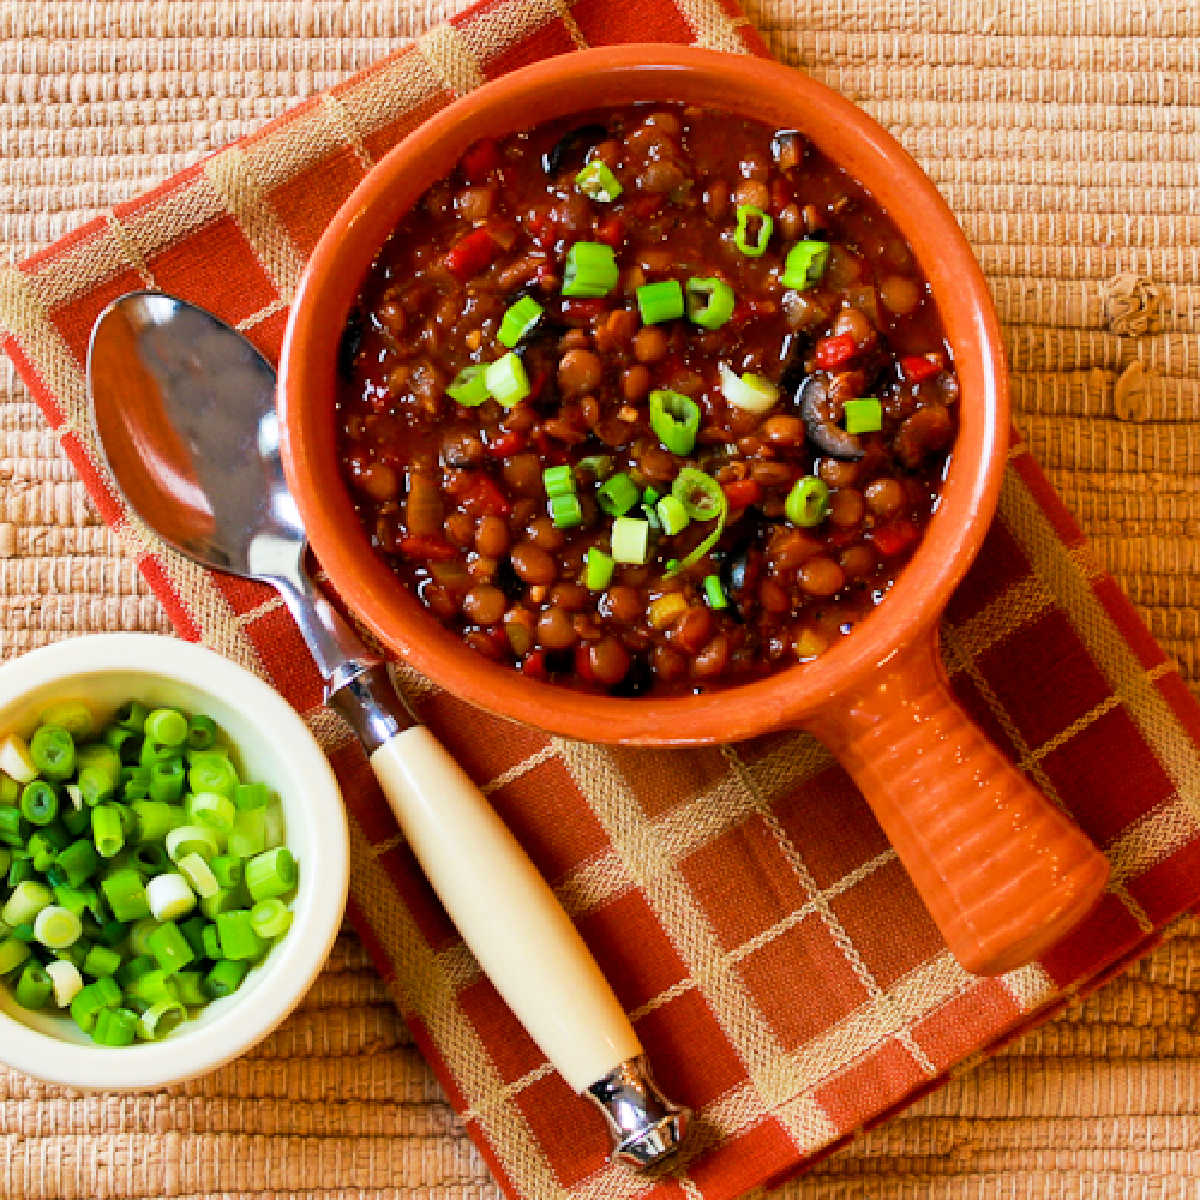 Square image for Vegan Lentil Chili shown with one bowl of chili and spoon, with green onions on the side.